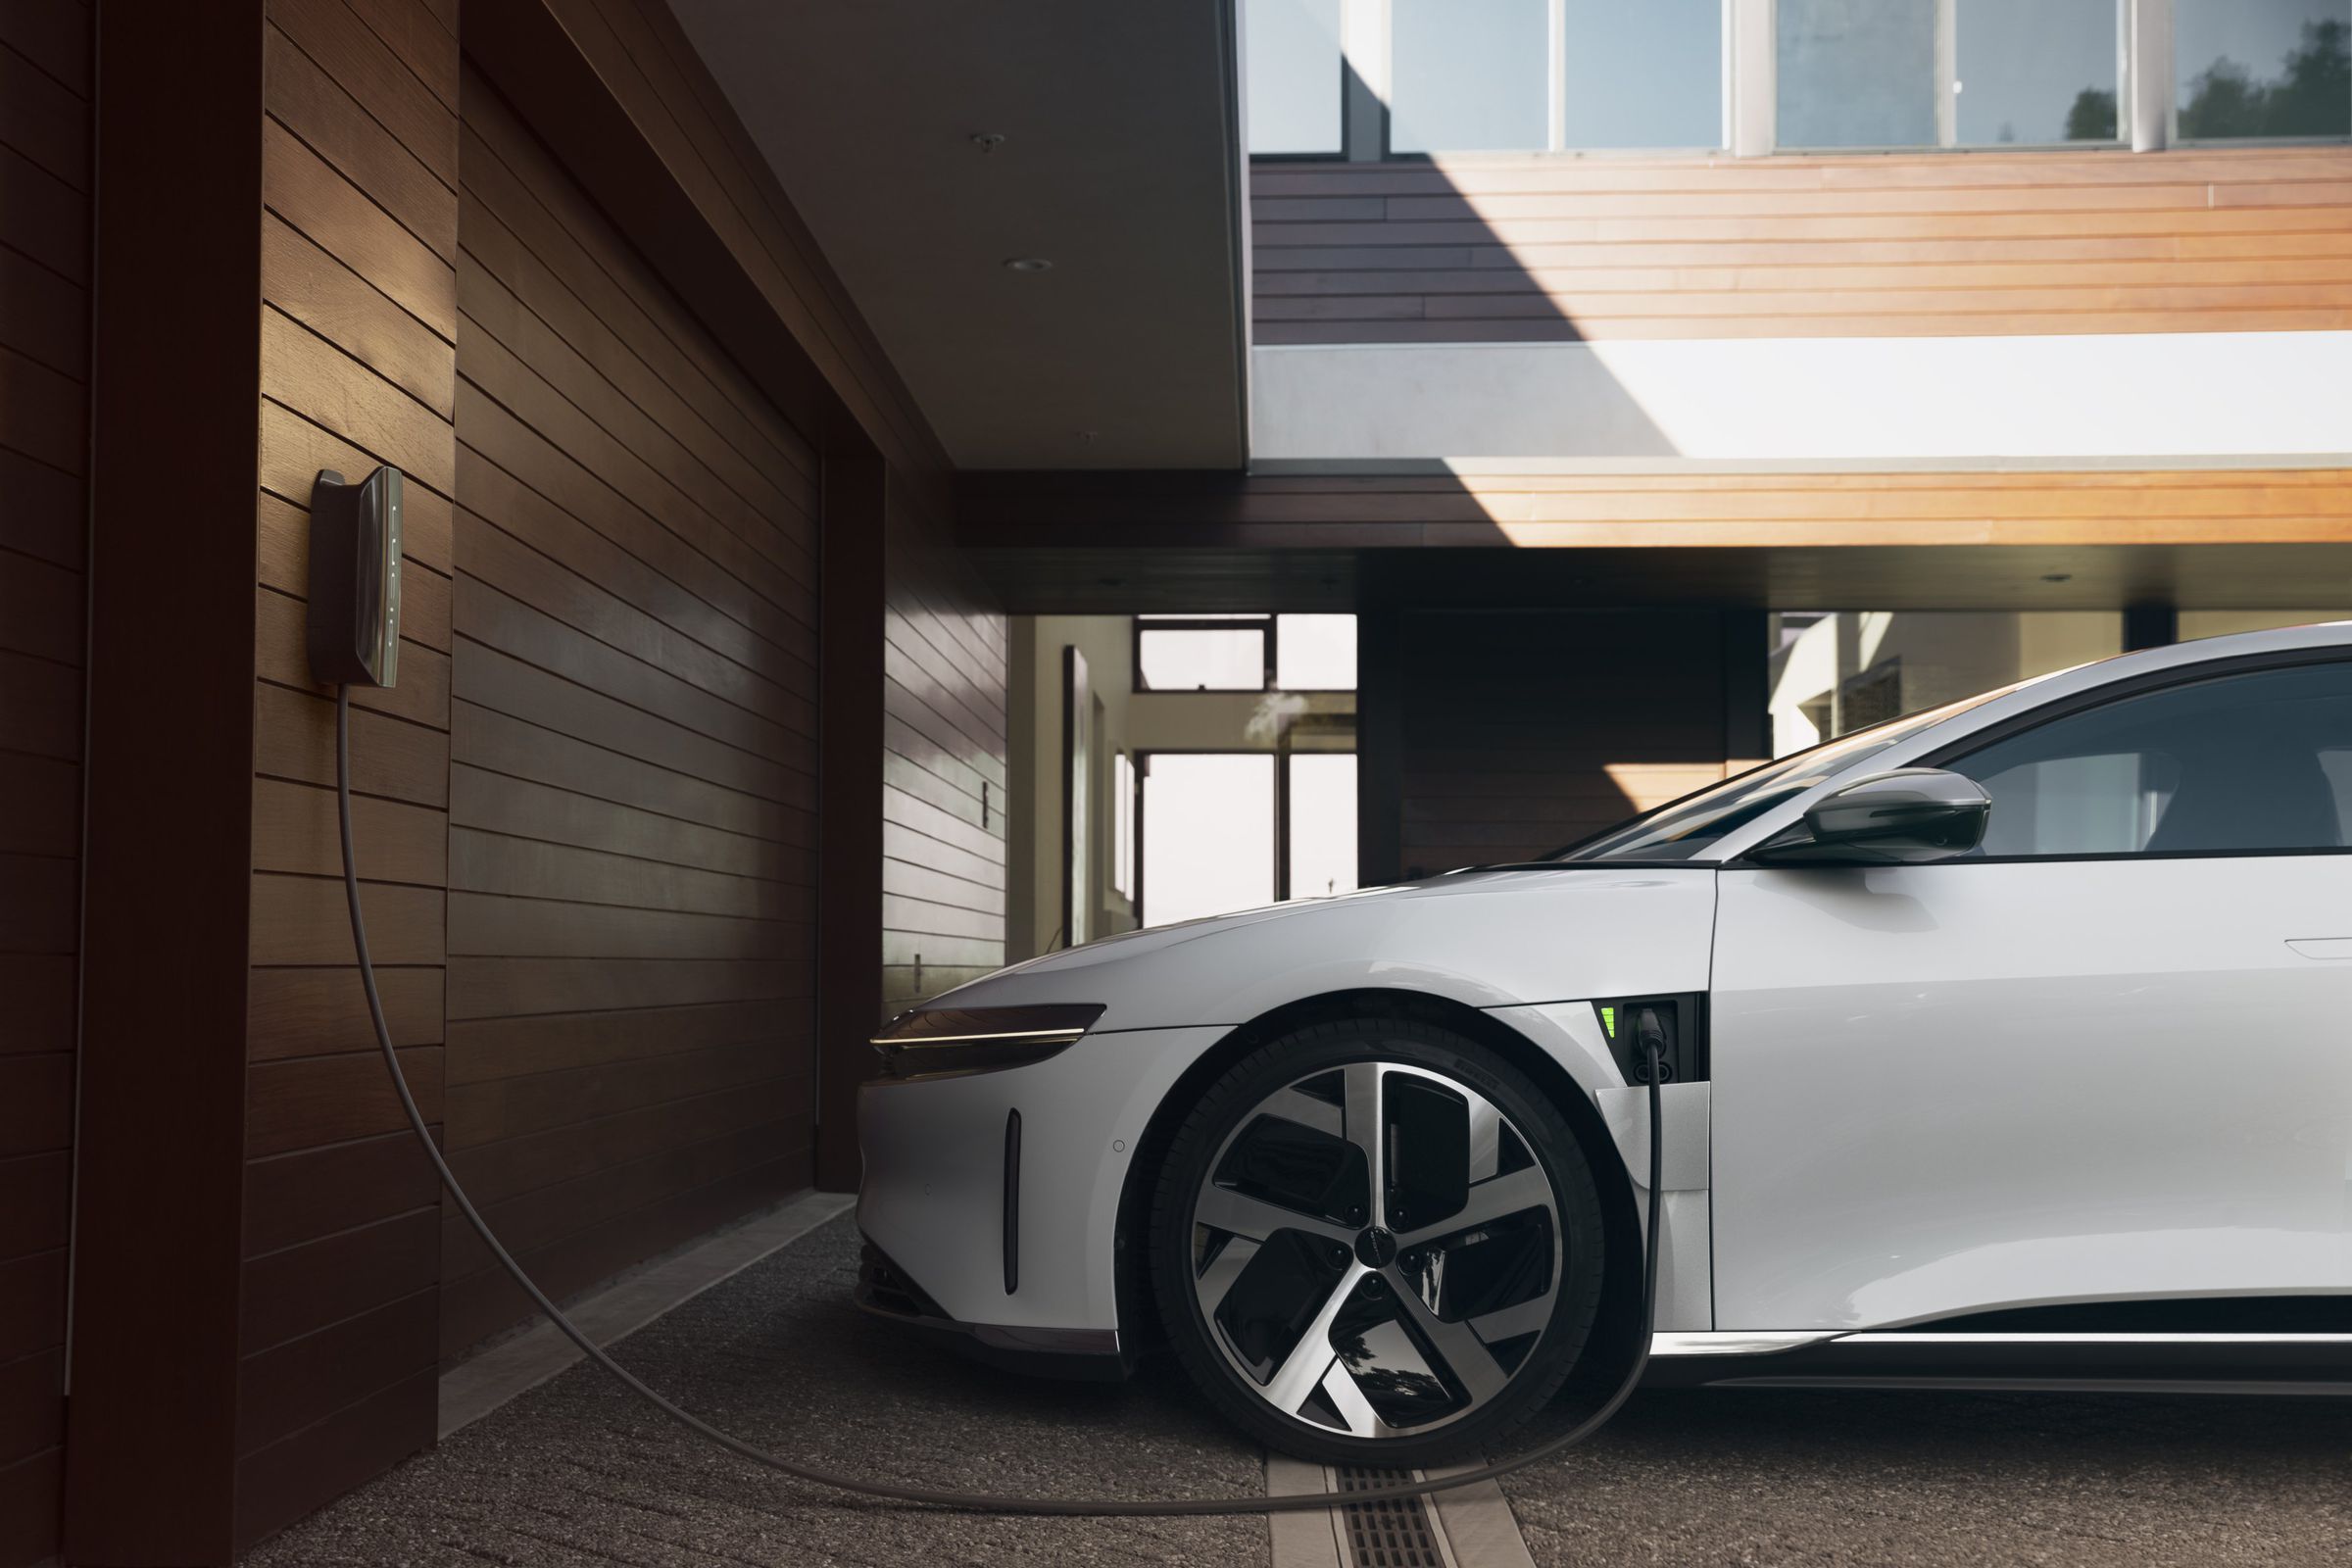 Lucid EV shown plugged into a wall charger outside a home with extensive wood paneling.